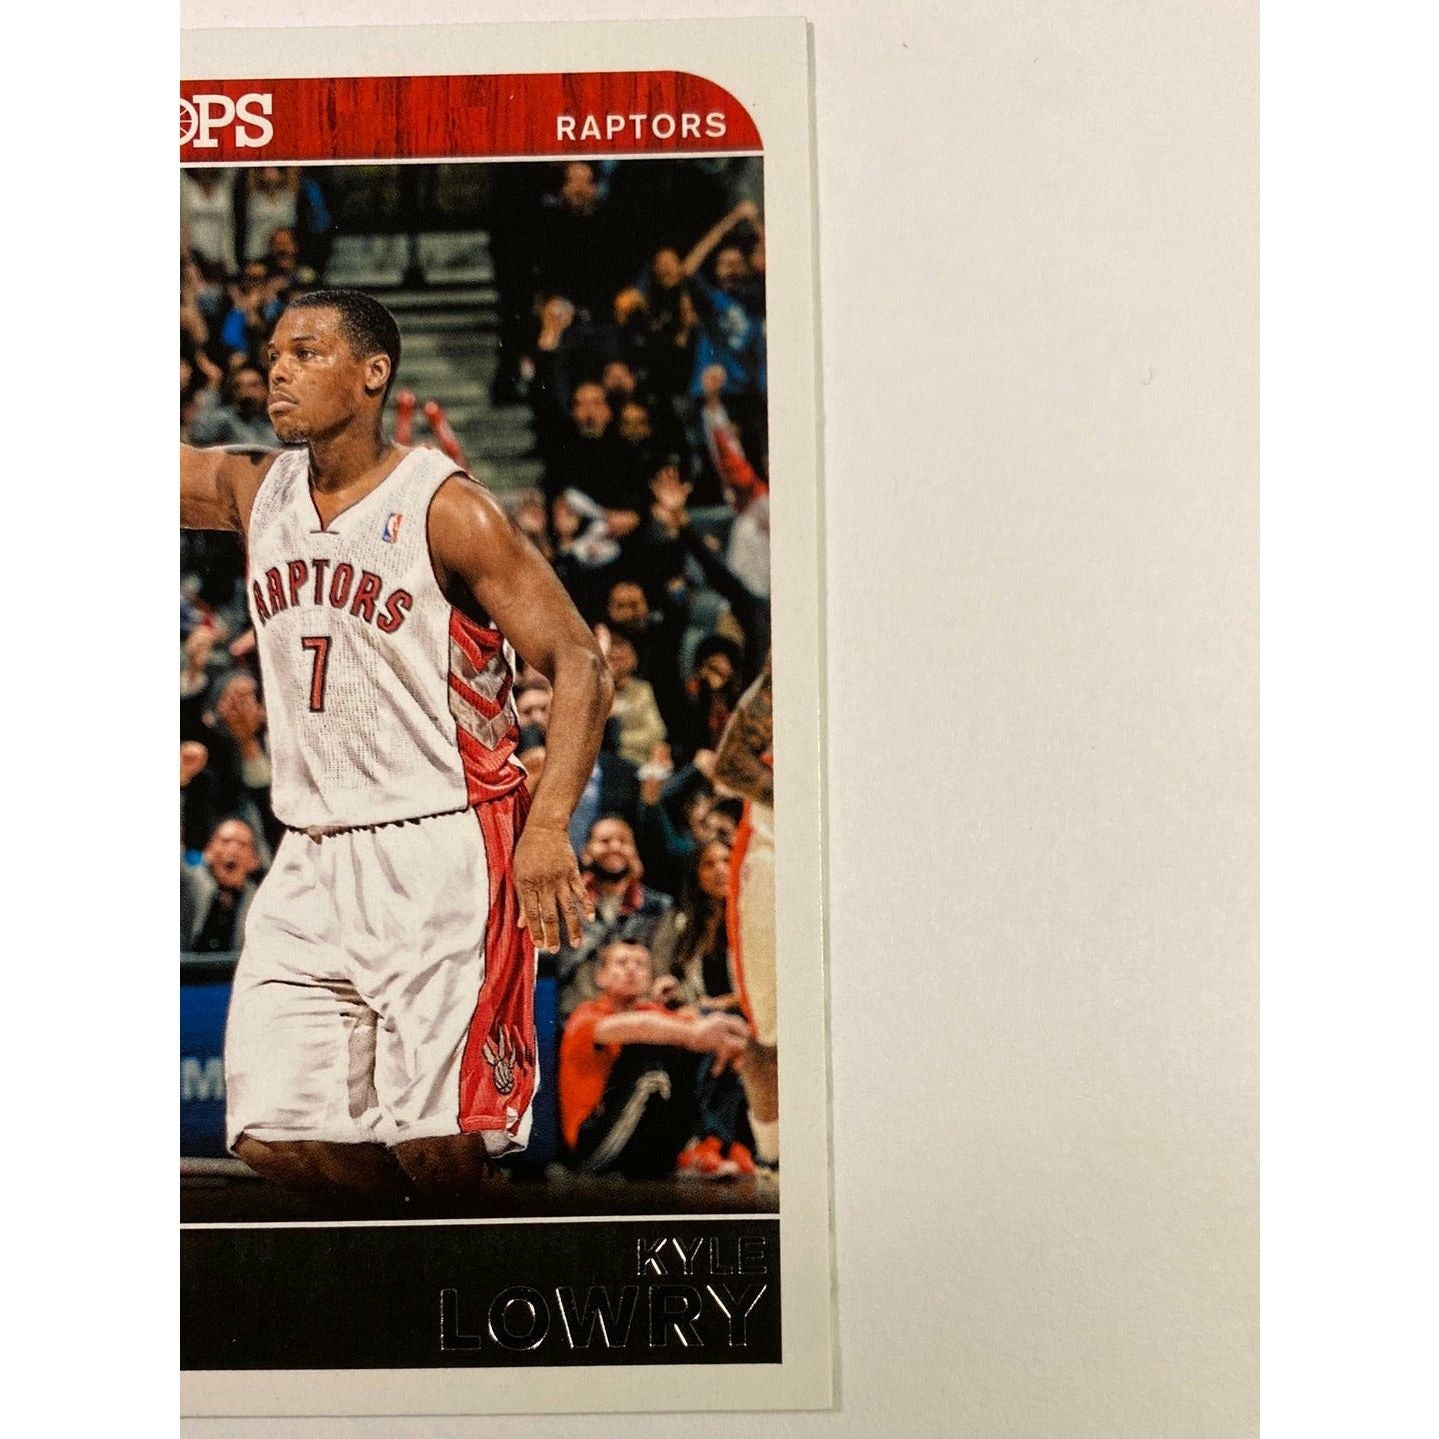  2014-15 Hoops Kyle Lowry  Local Legends Cards & Collectibles